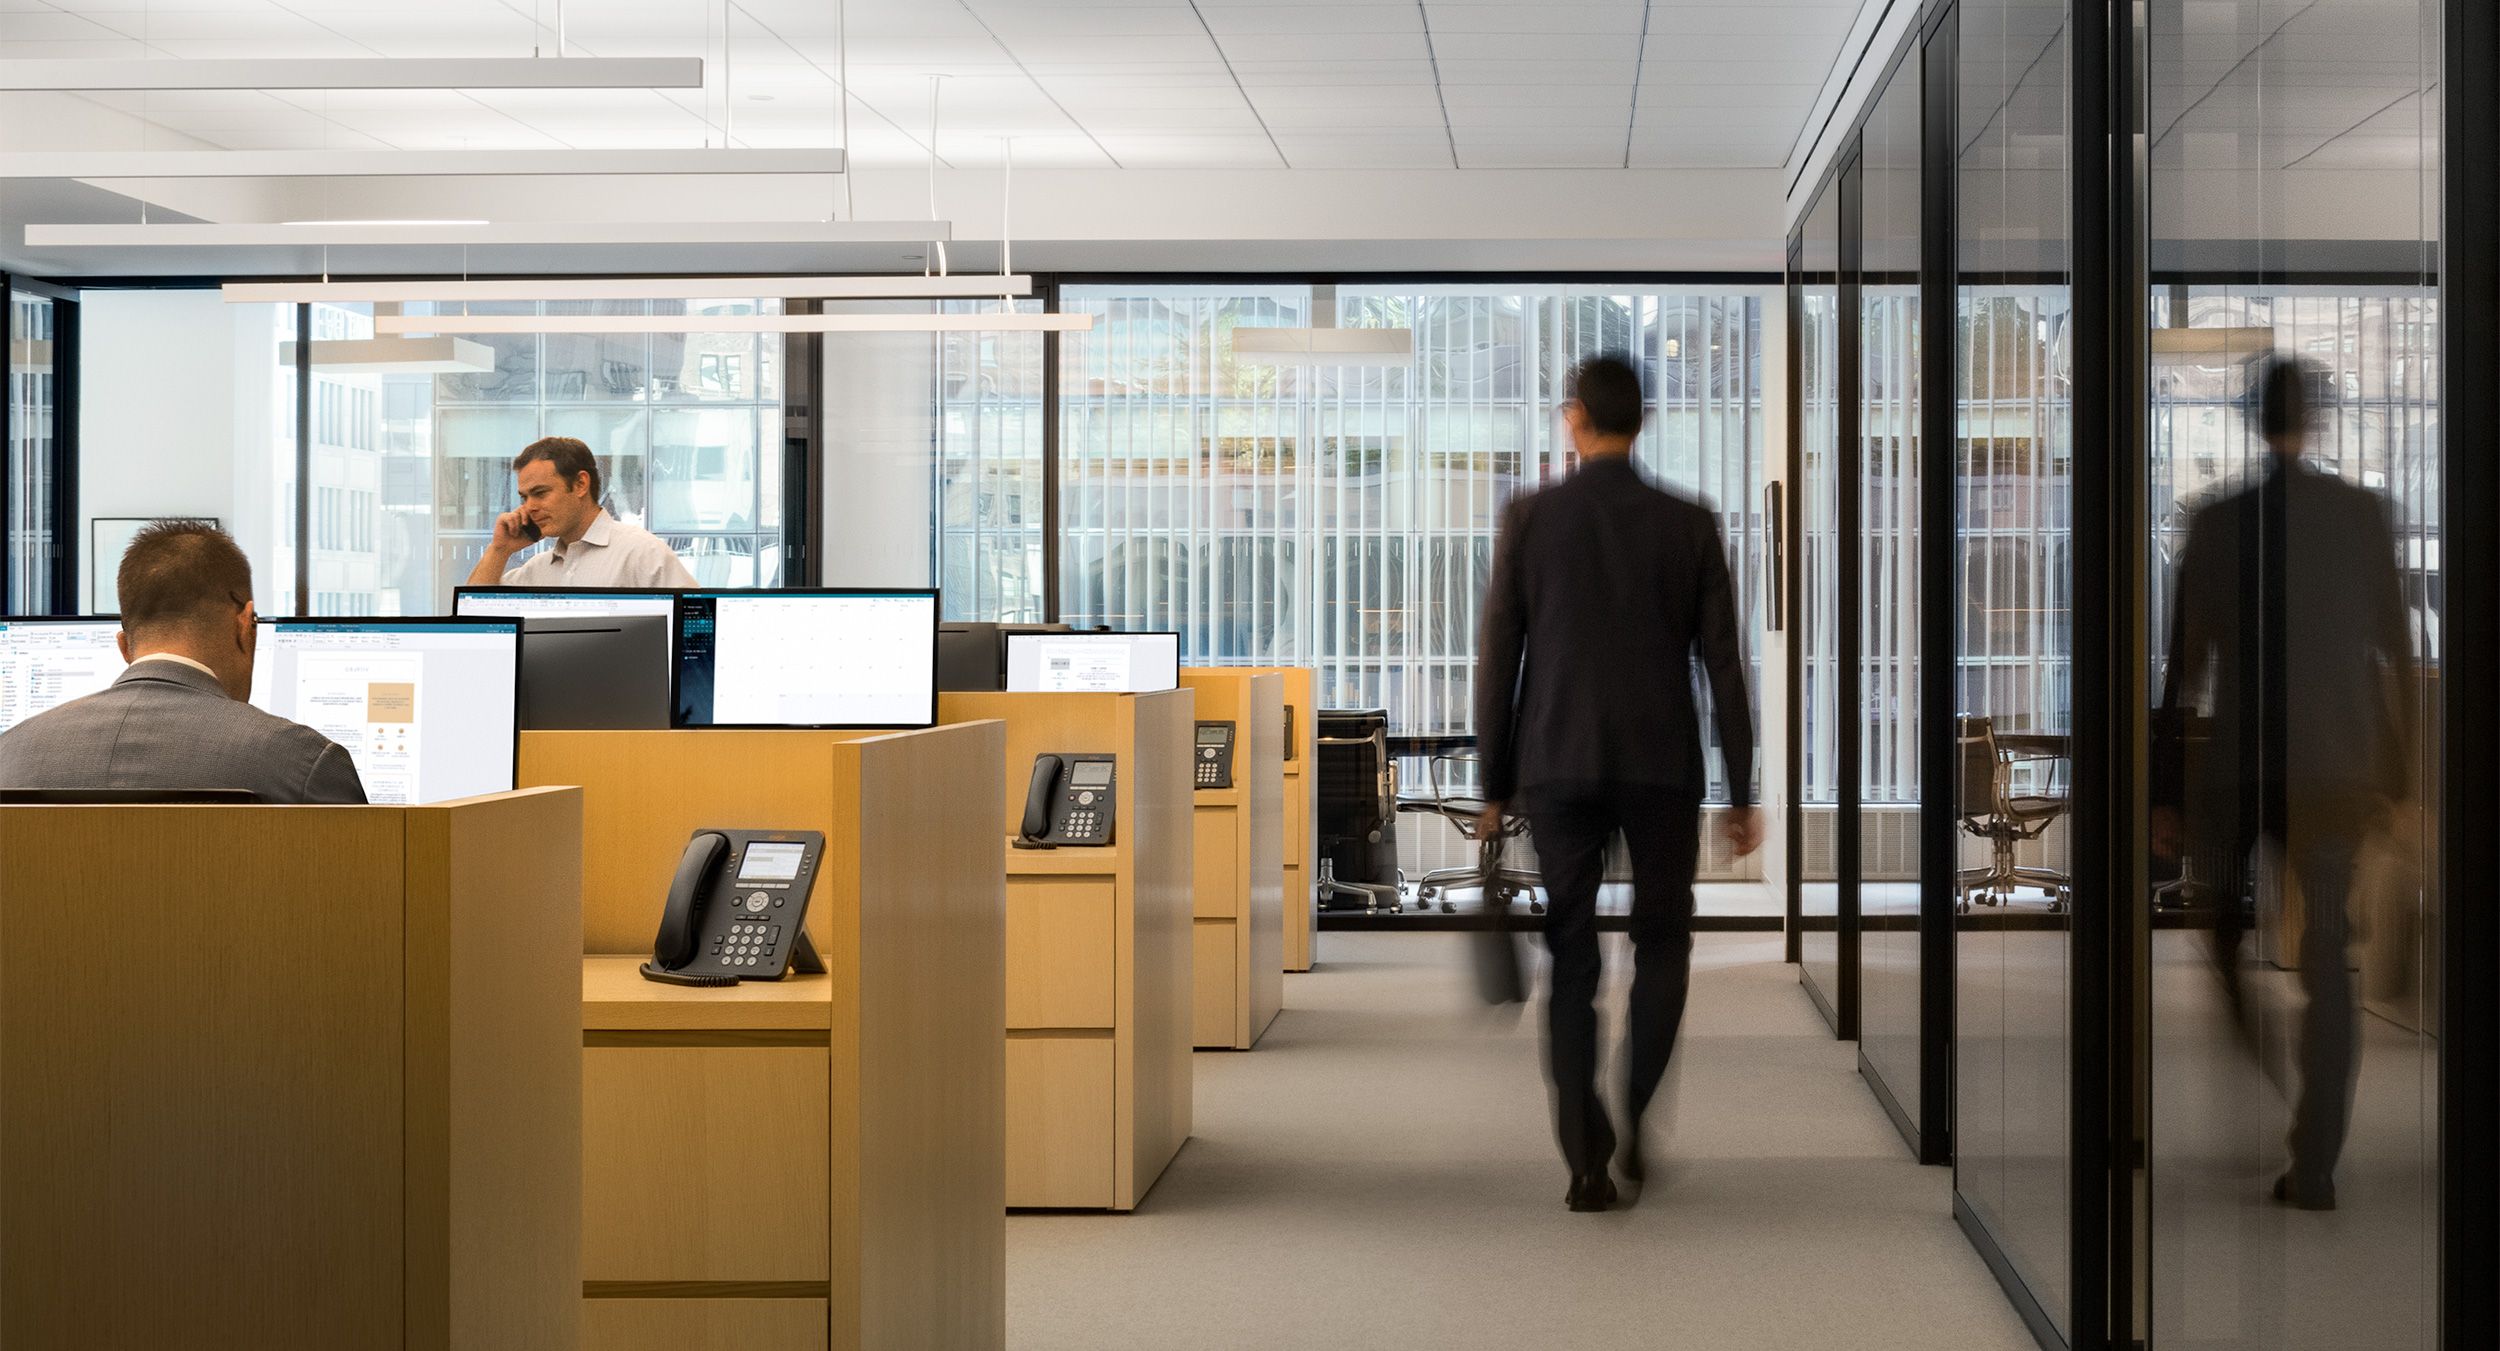 NEW MILLENNIA open workstations enhance collaboration while preserving individual space.